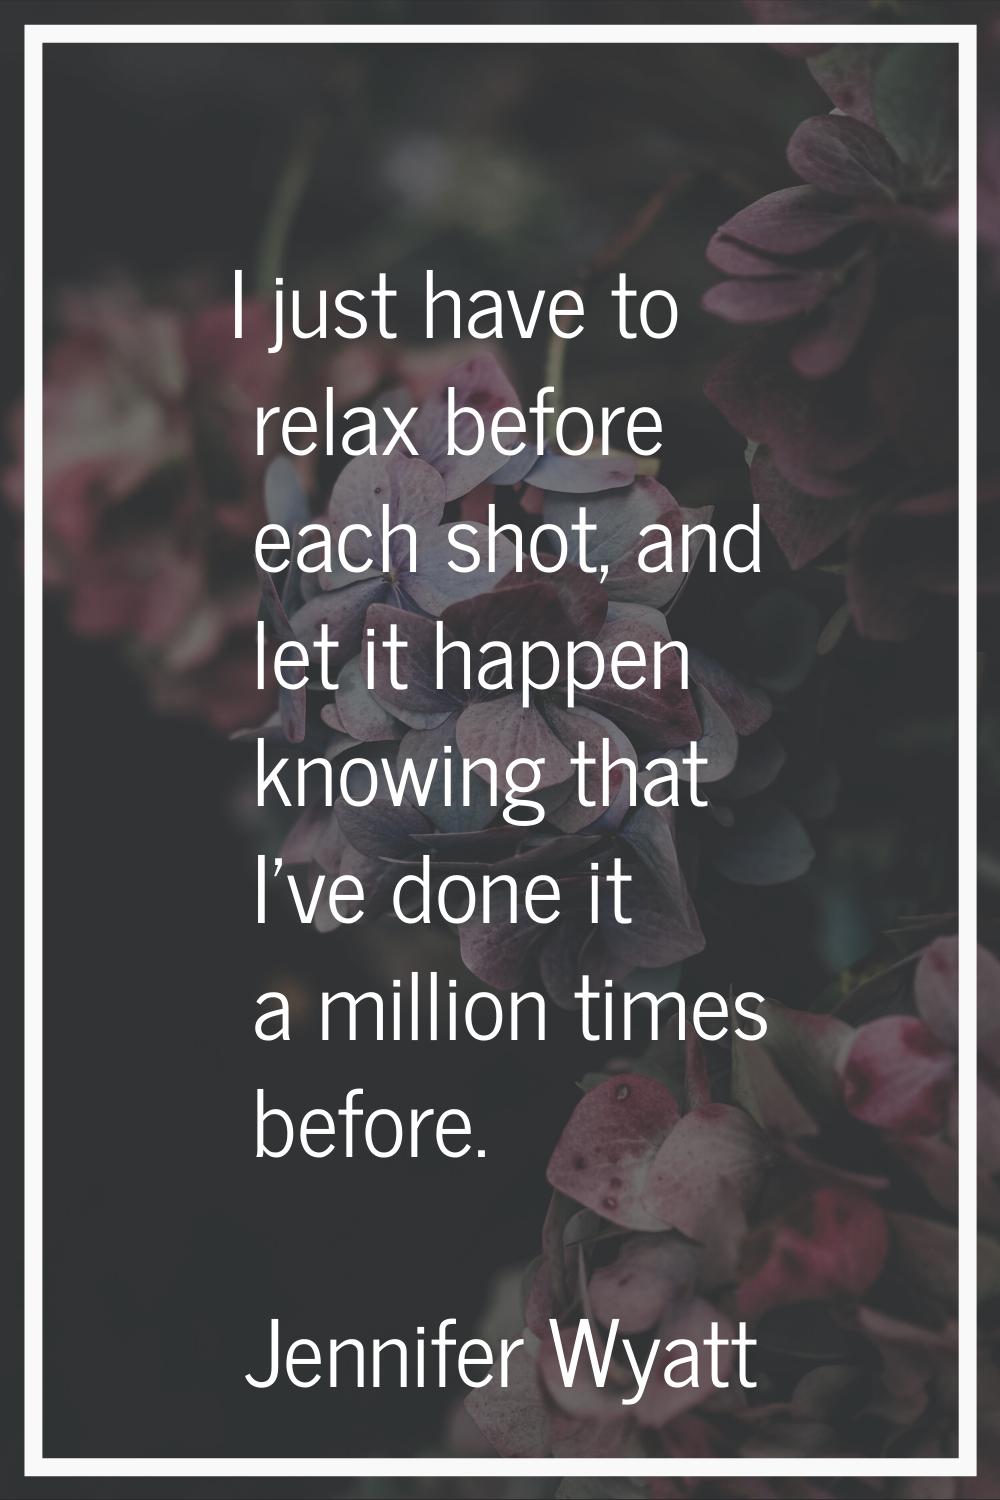 I just have to relax before each shot, and let it happen knowing that I've done it a million times 